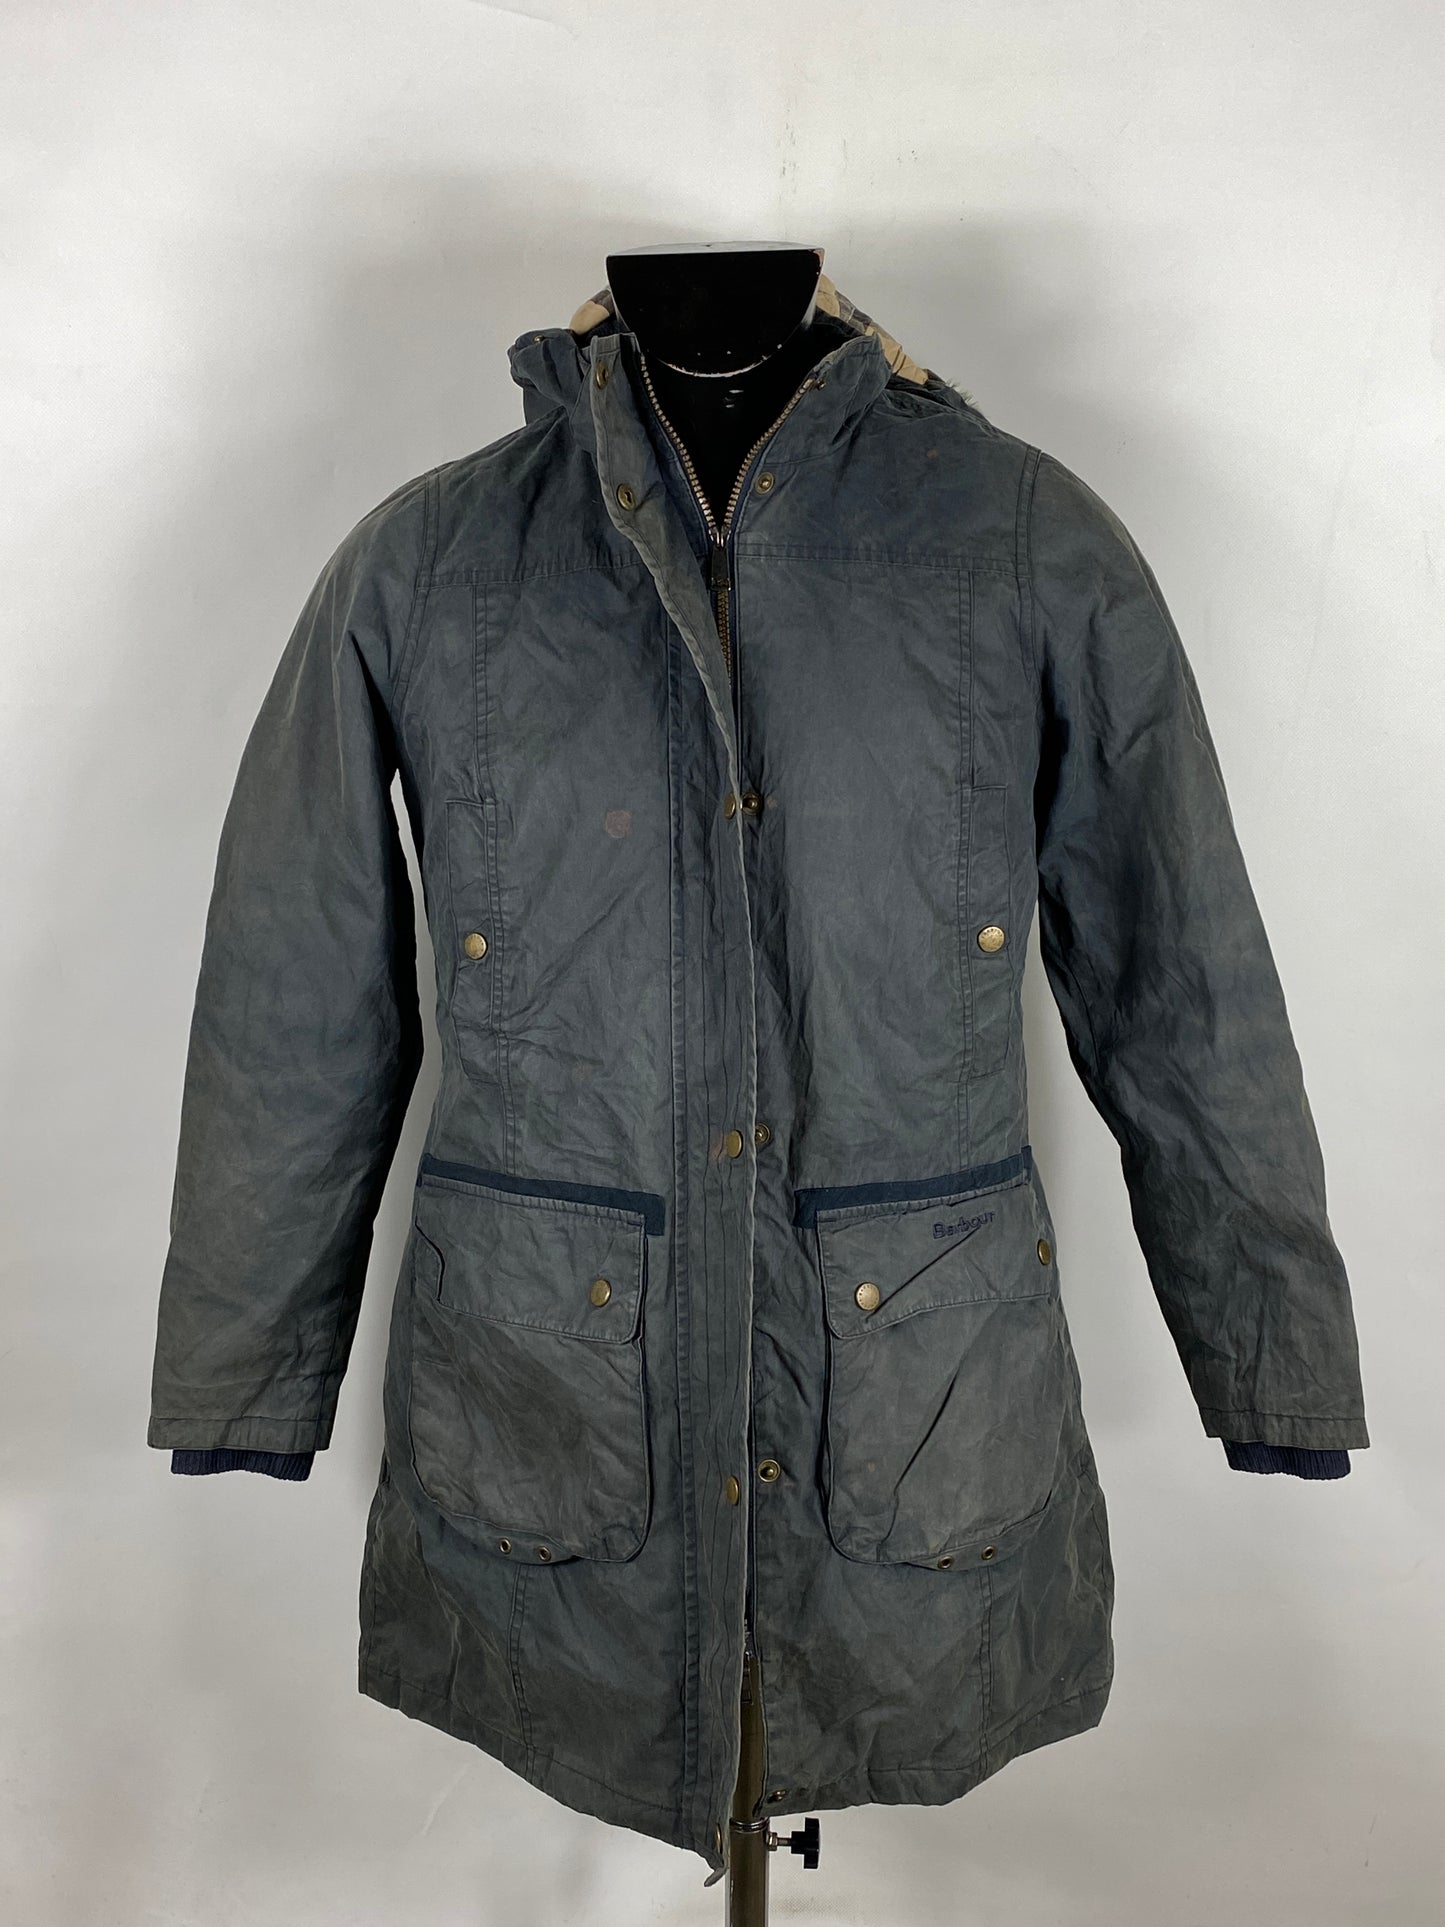 Giacca Barbour donna blu impermeabile Tg. 42 Navy Waterproof Lady Jacket Size Uk12